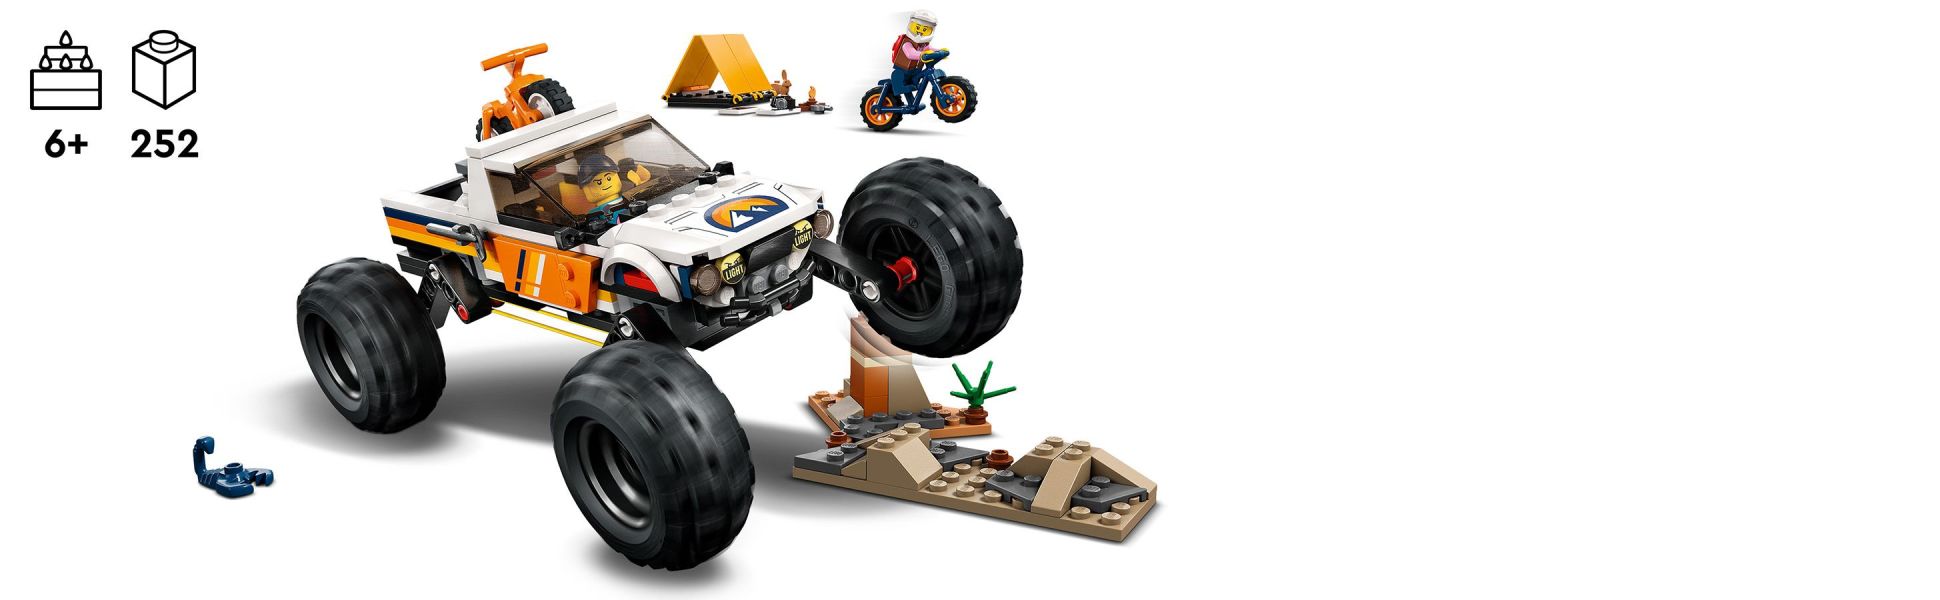 LEGO City 4x4 Off-Roader Adventures 60387 Building Toy - Camping Set  Including Monster Truck Style Car with Working Suspension and Mountain  Bikes, 2 Minifigures, Vehicle Toy for Kids Ages 6+